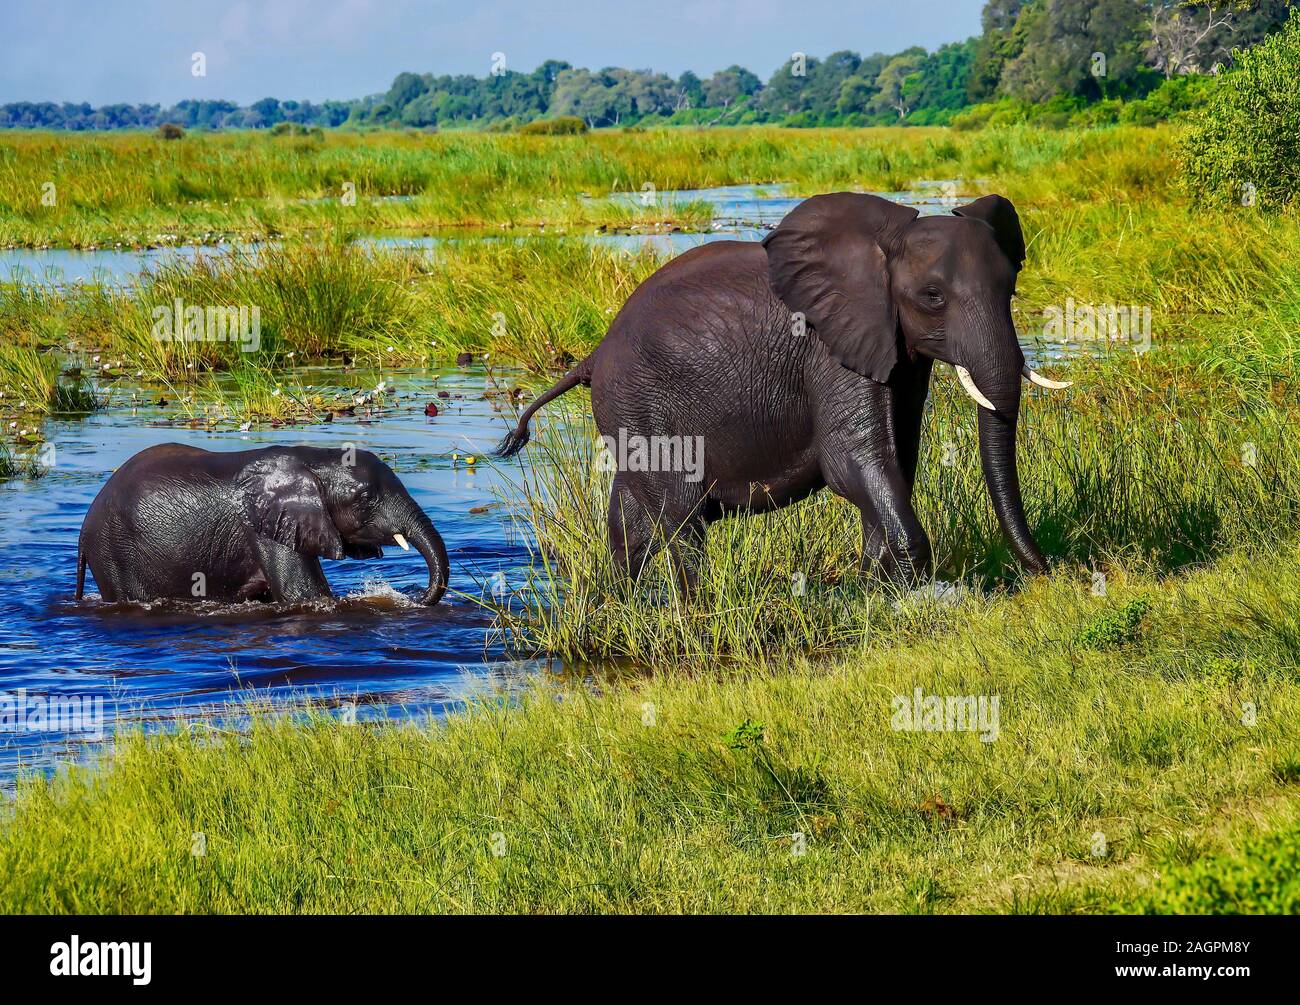 A mother African elephant leads her wet baby out of the water and onto a grassy shore, after swimming across a river in the lush, green Okavango Delta Stock Photo